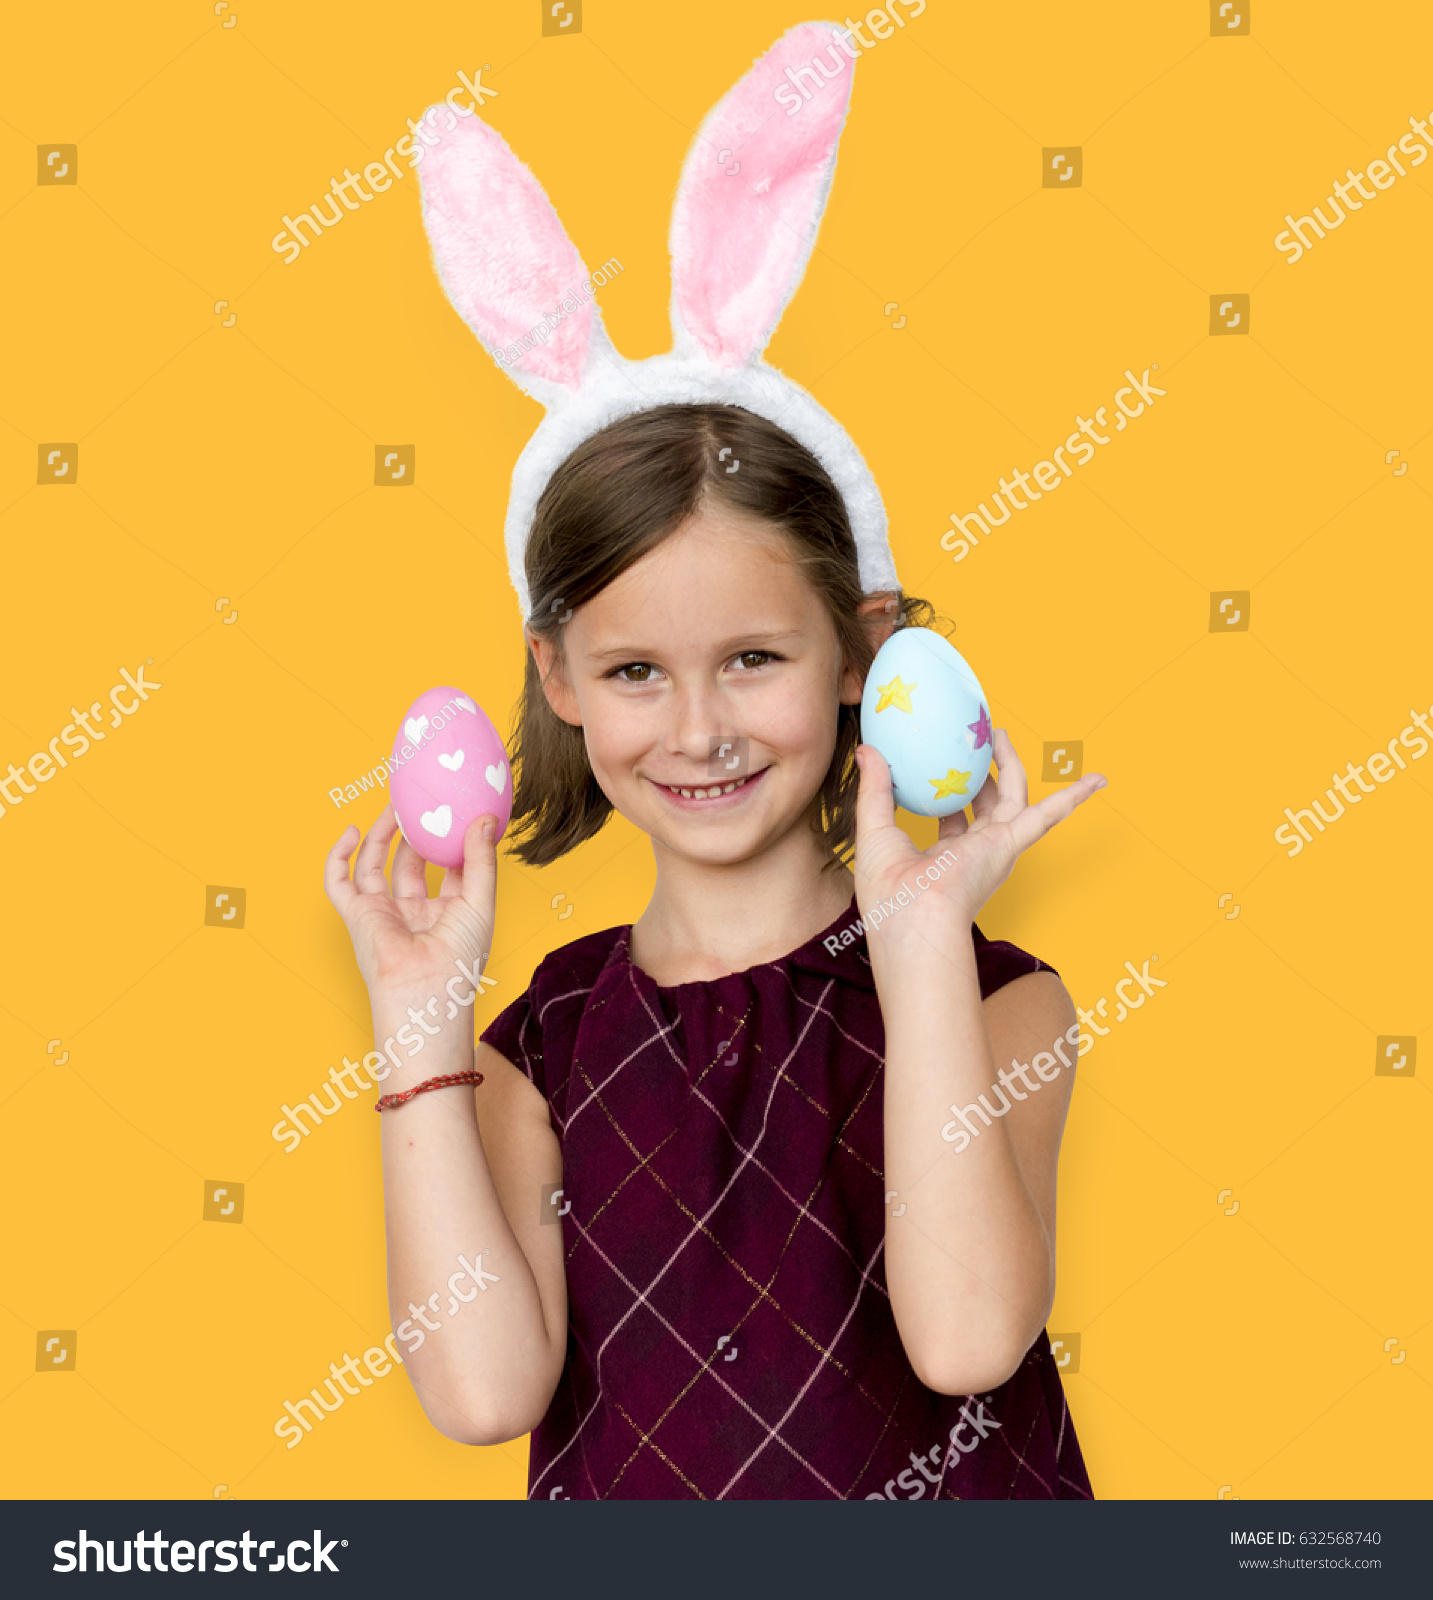 Kid with a bunny hairband holding eggs #632568740